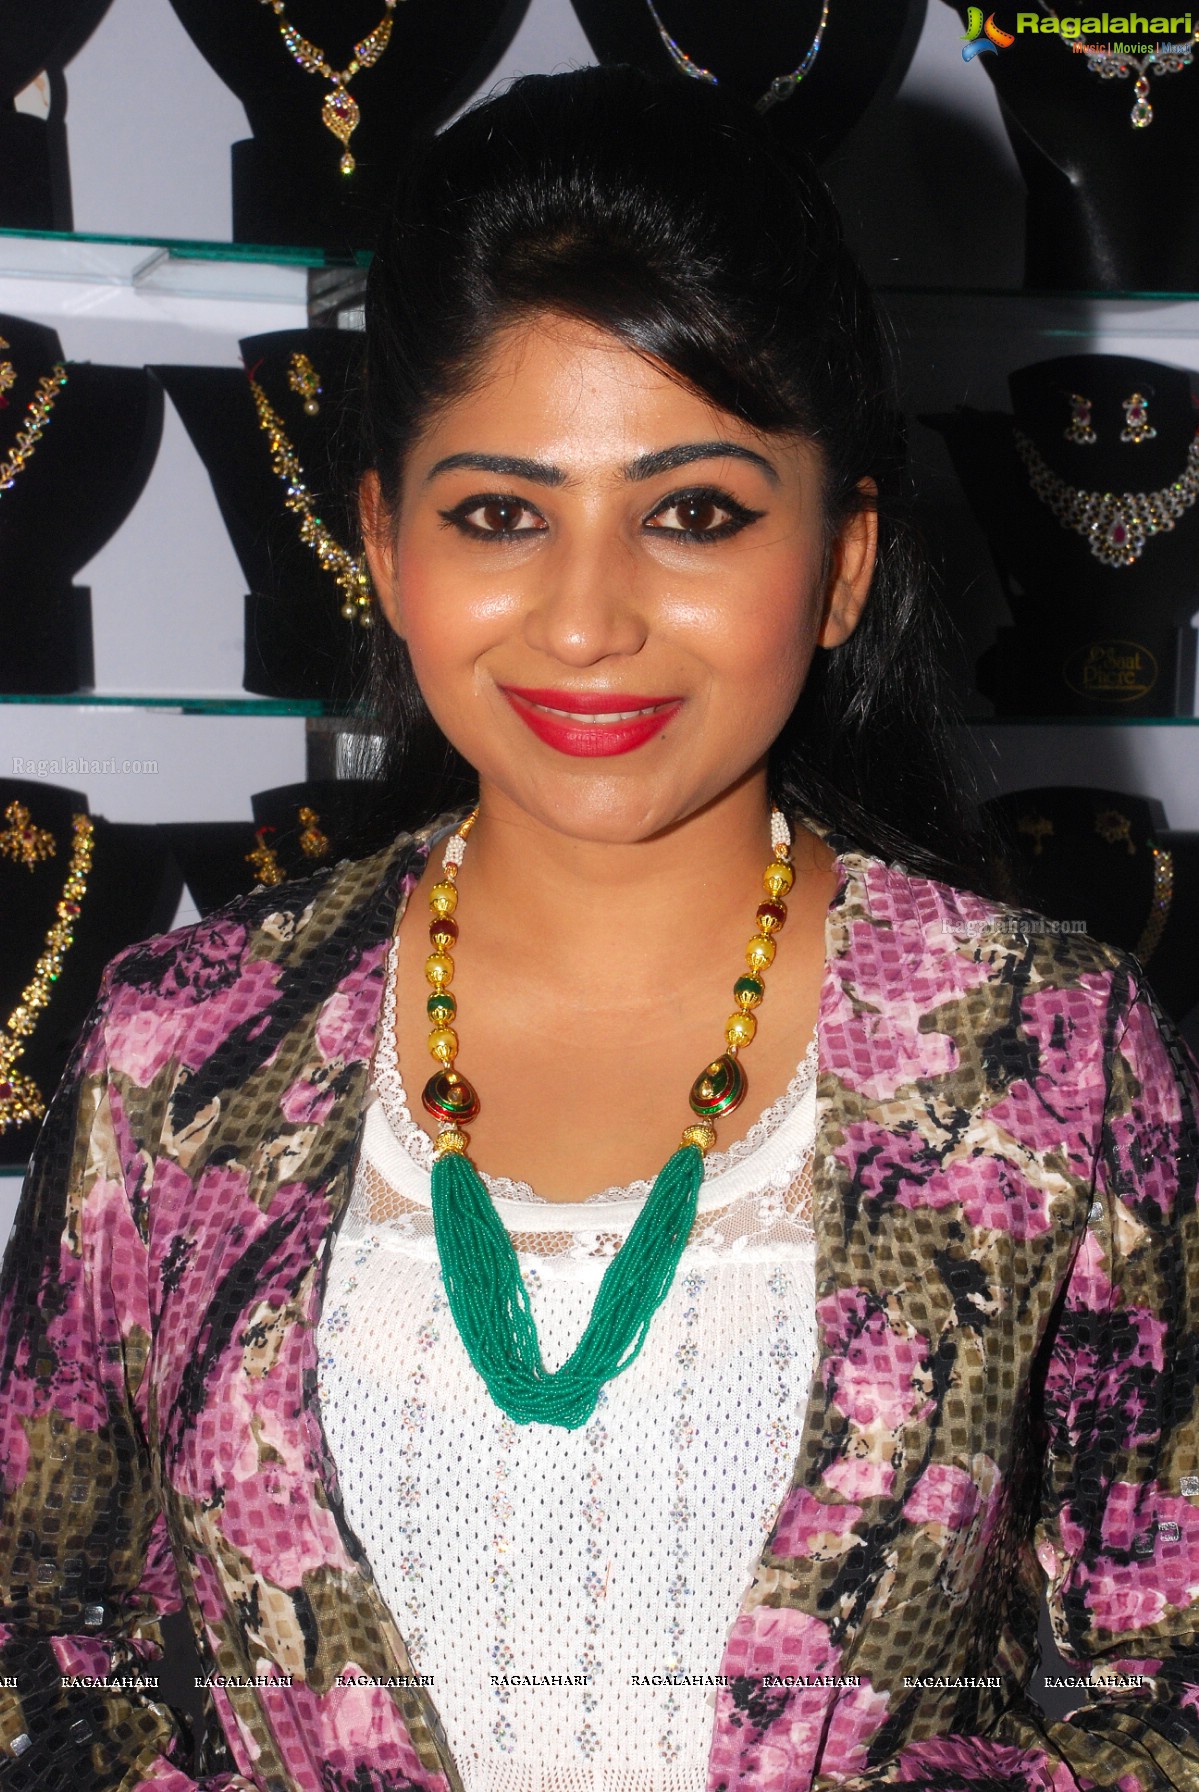 Madhulagna Das inaugurated Styles n Weaves Lifestyle Expo 2014, Hyderabad